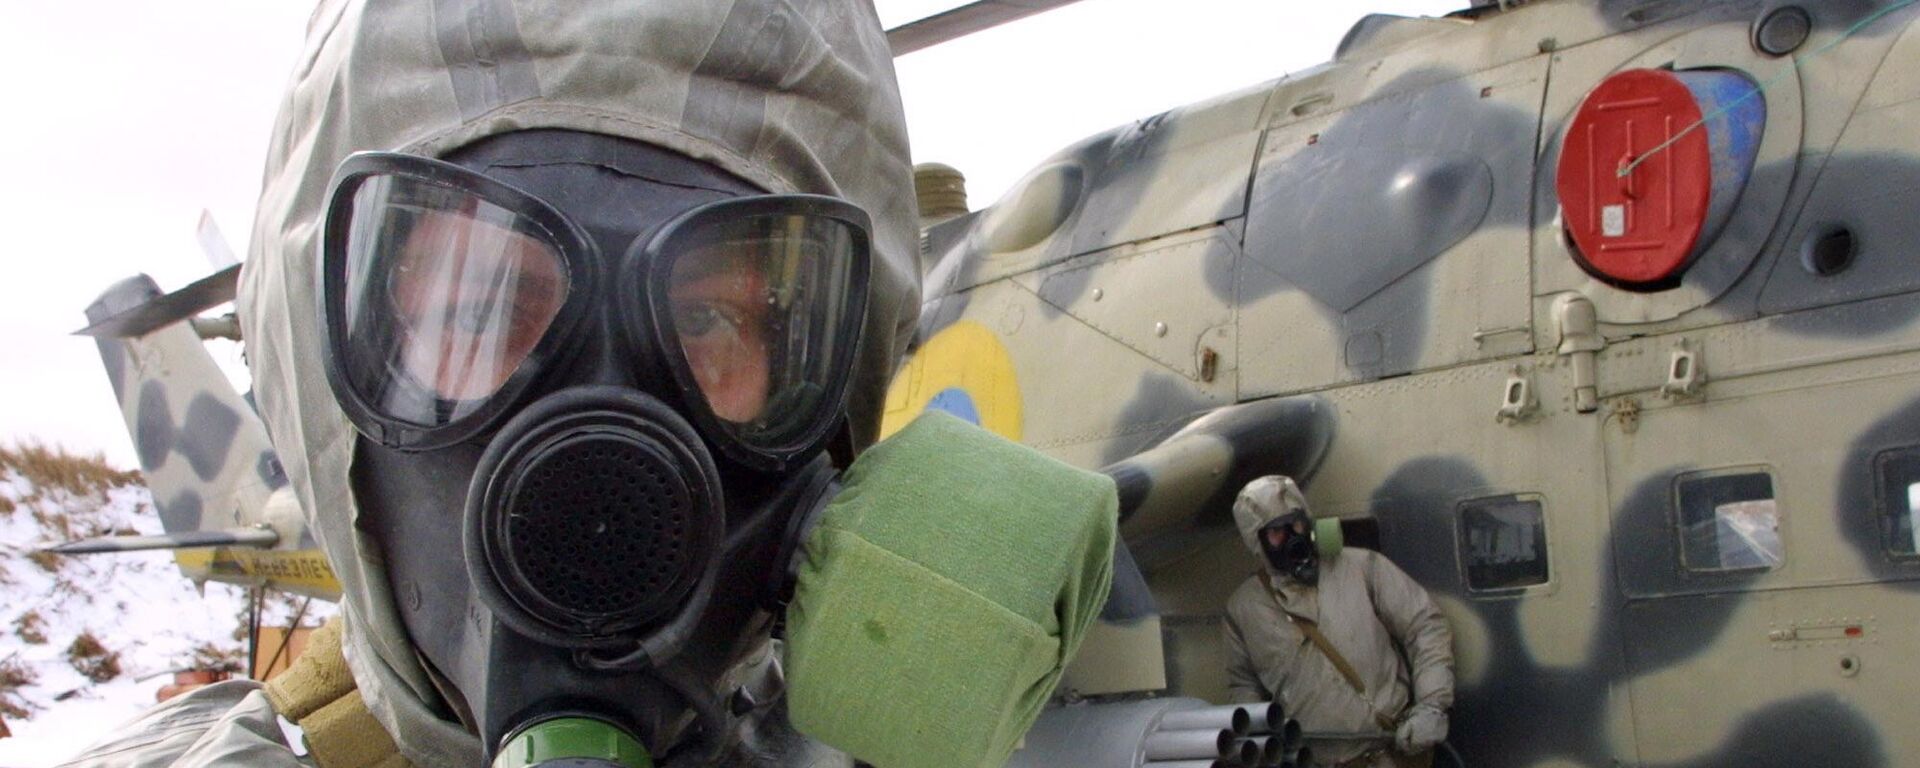 FILE PHOTO: Ukrainian soldier wears a protective suit and a gas mask during exercises of Ukrainian anti-chemical weapons forces in Kalyniv, 620 kilometers (390 miles) west of Kiev, Ukraine. File photo. - Sputnik International, 1920, 06.02.2023